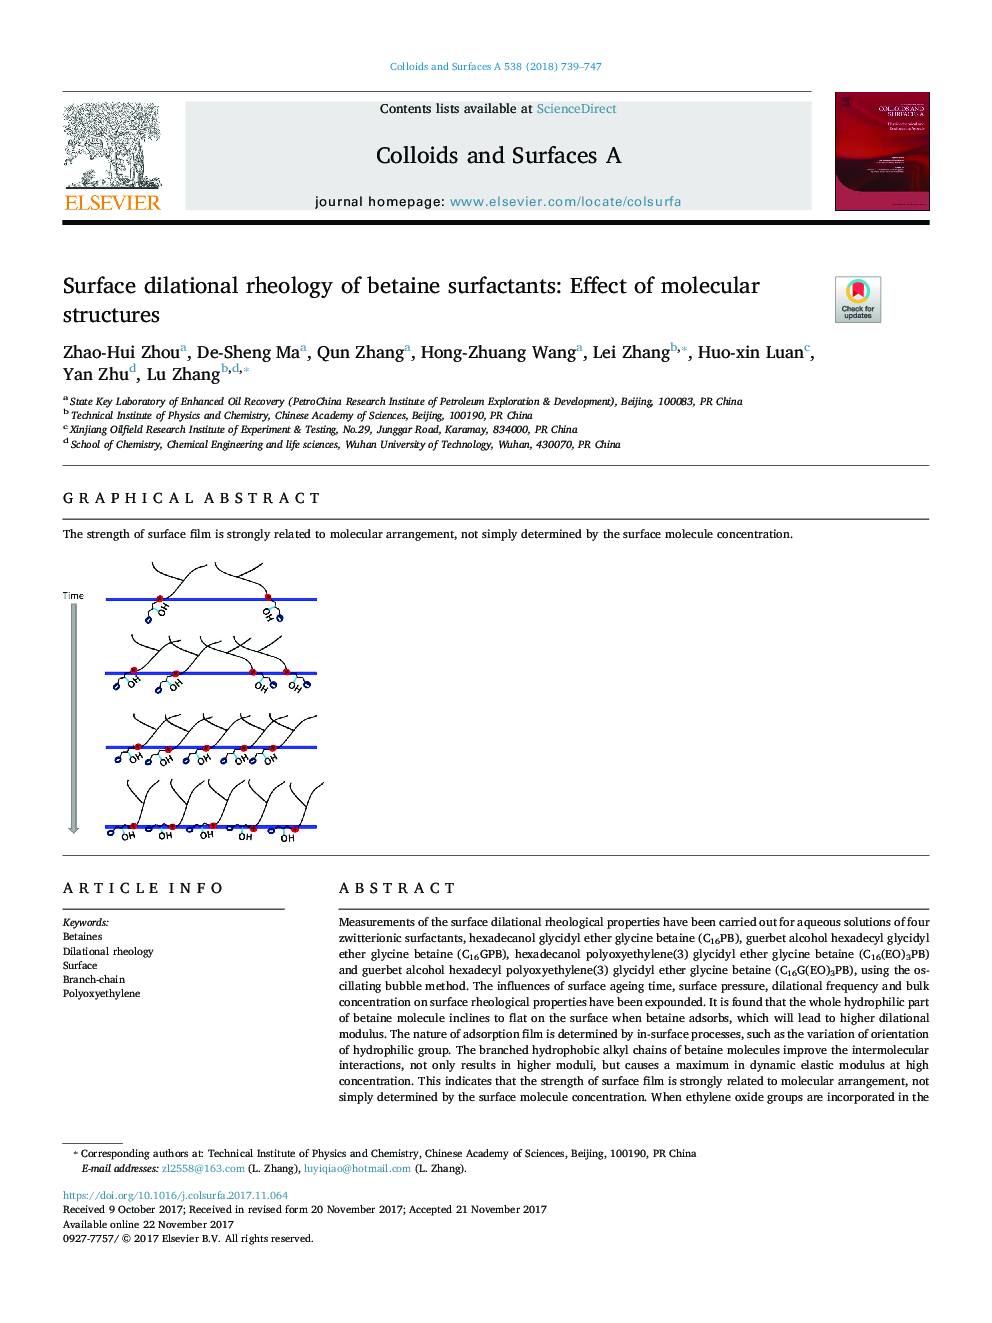 Surface dilational rheology of betaine surfactants: Effect of molecular structures